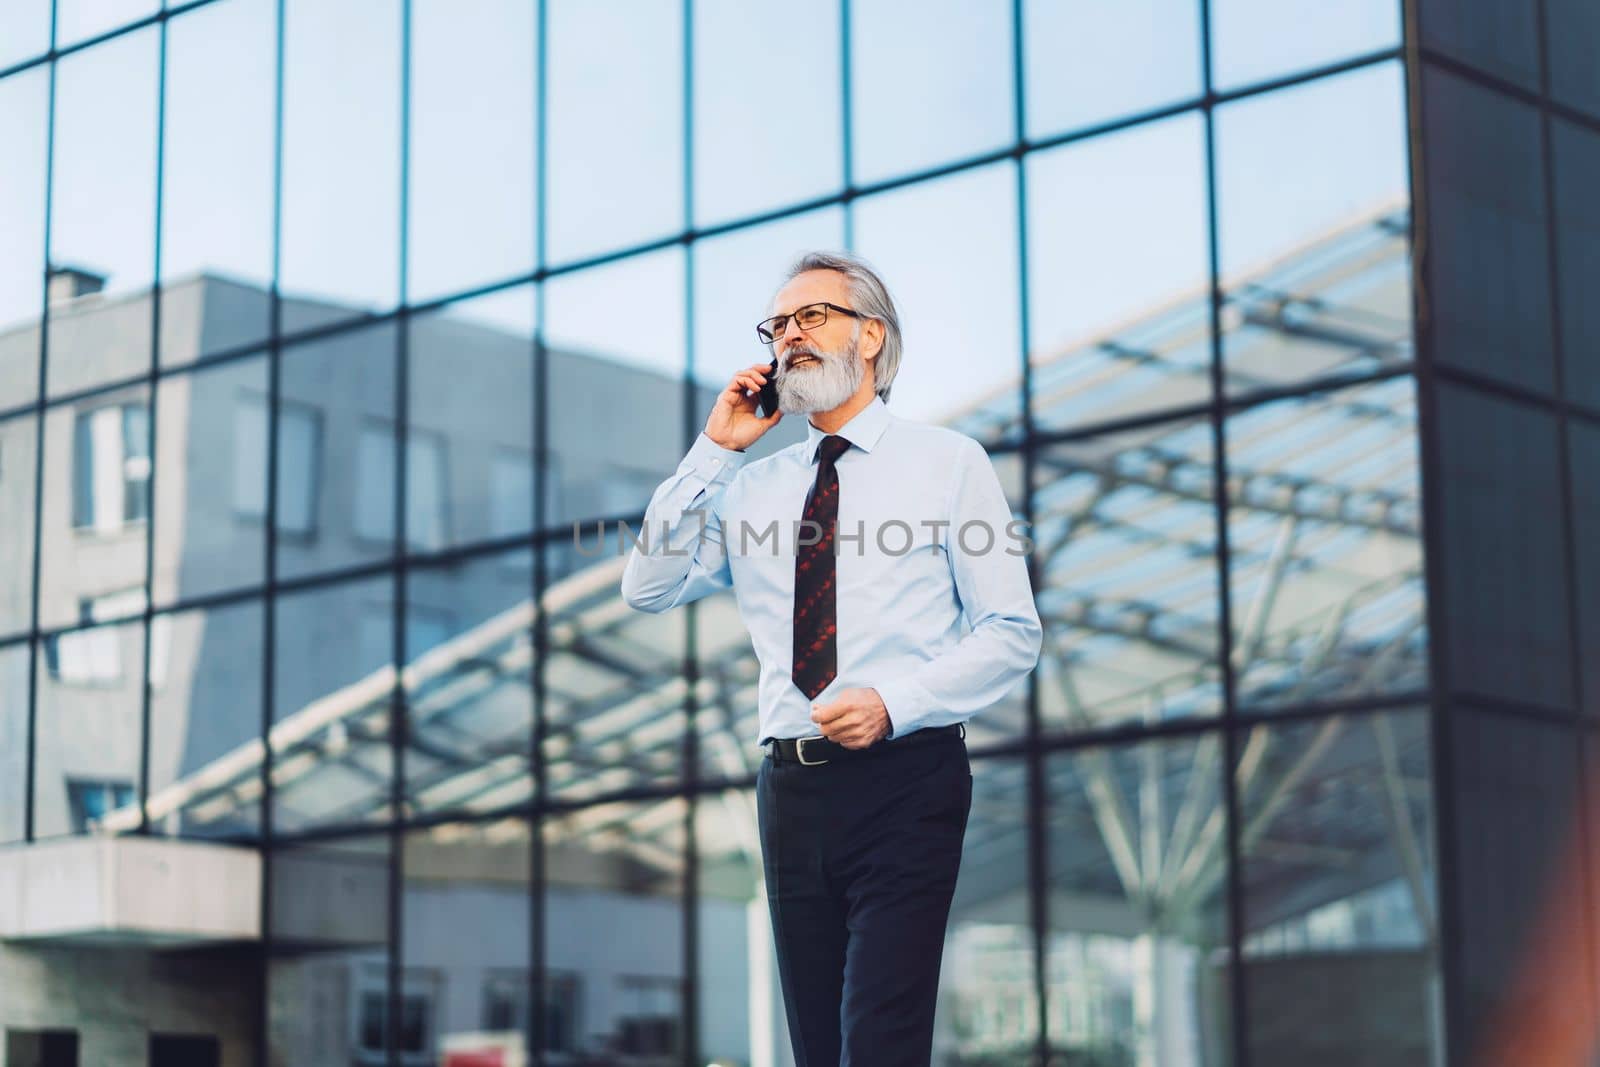 Senior business man with grey hair and a beard talking on the phone outside on a sunny day. CEO on the phone call outside.